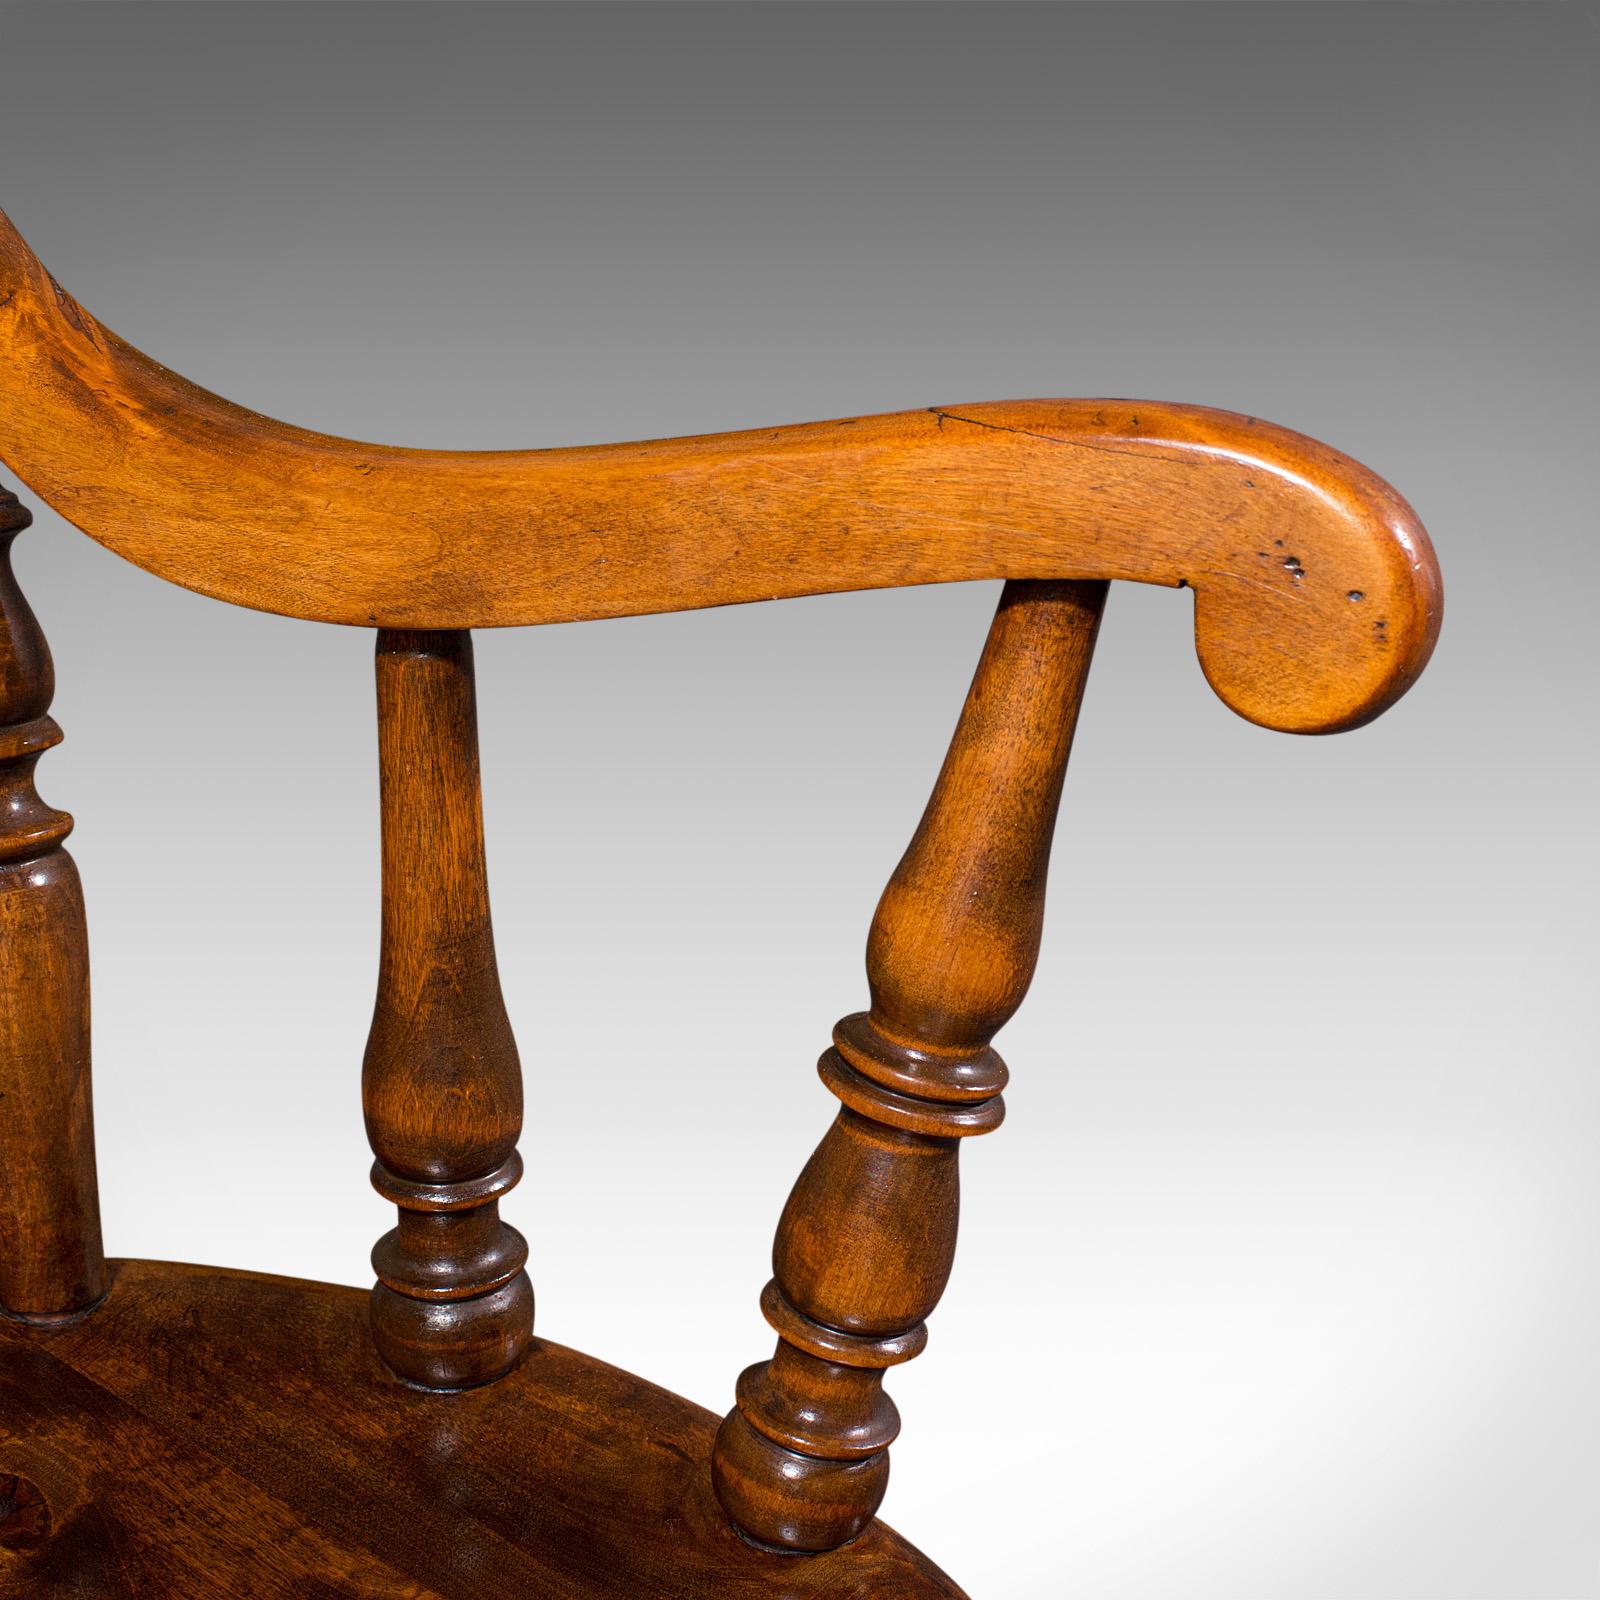 Antique Fireside Elbow Chair, English, Beech, Occasional Seat, Victorian, C.1890 For Sale 5